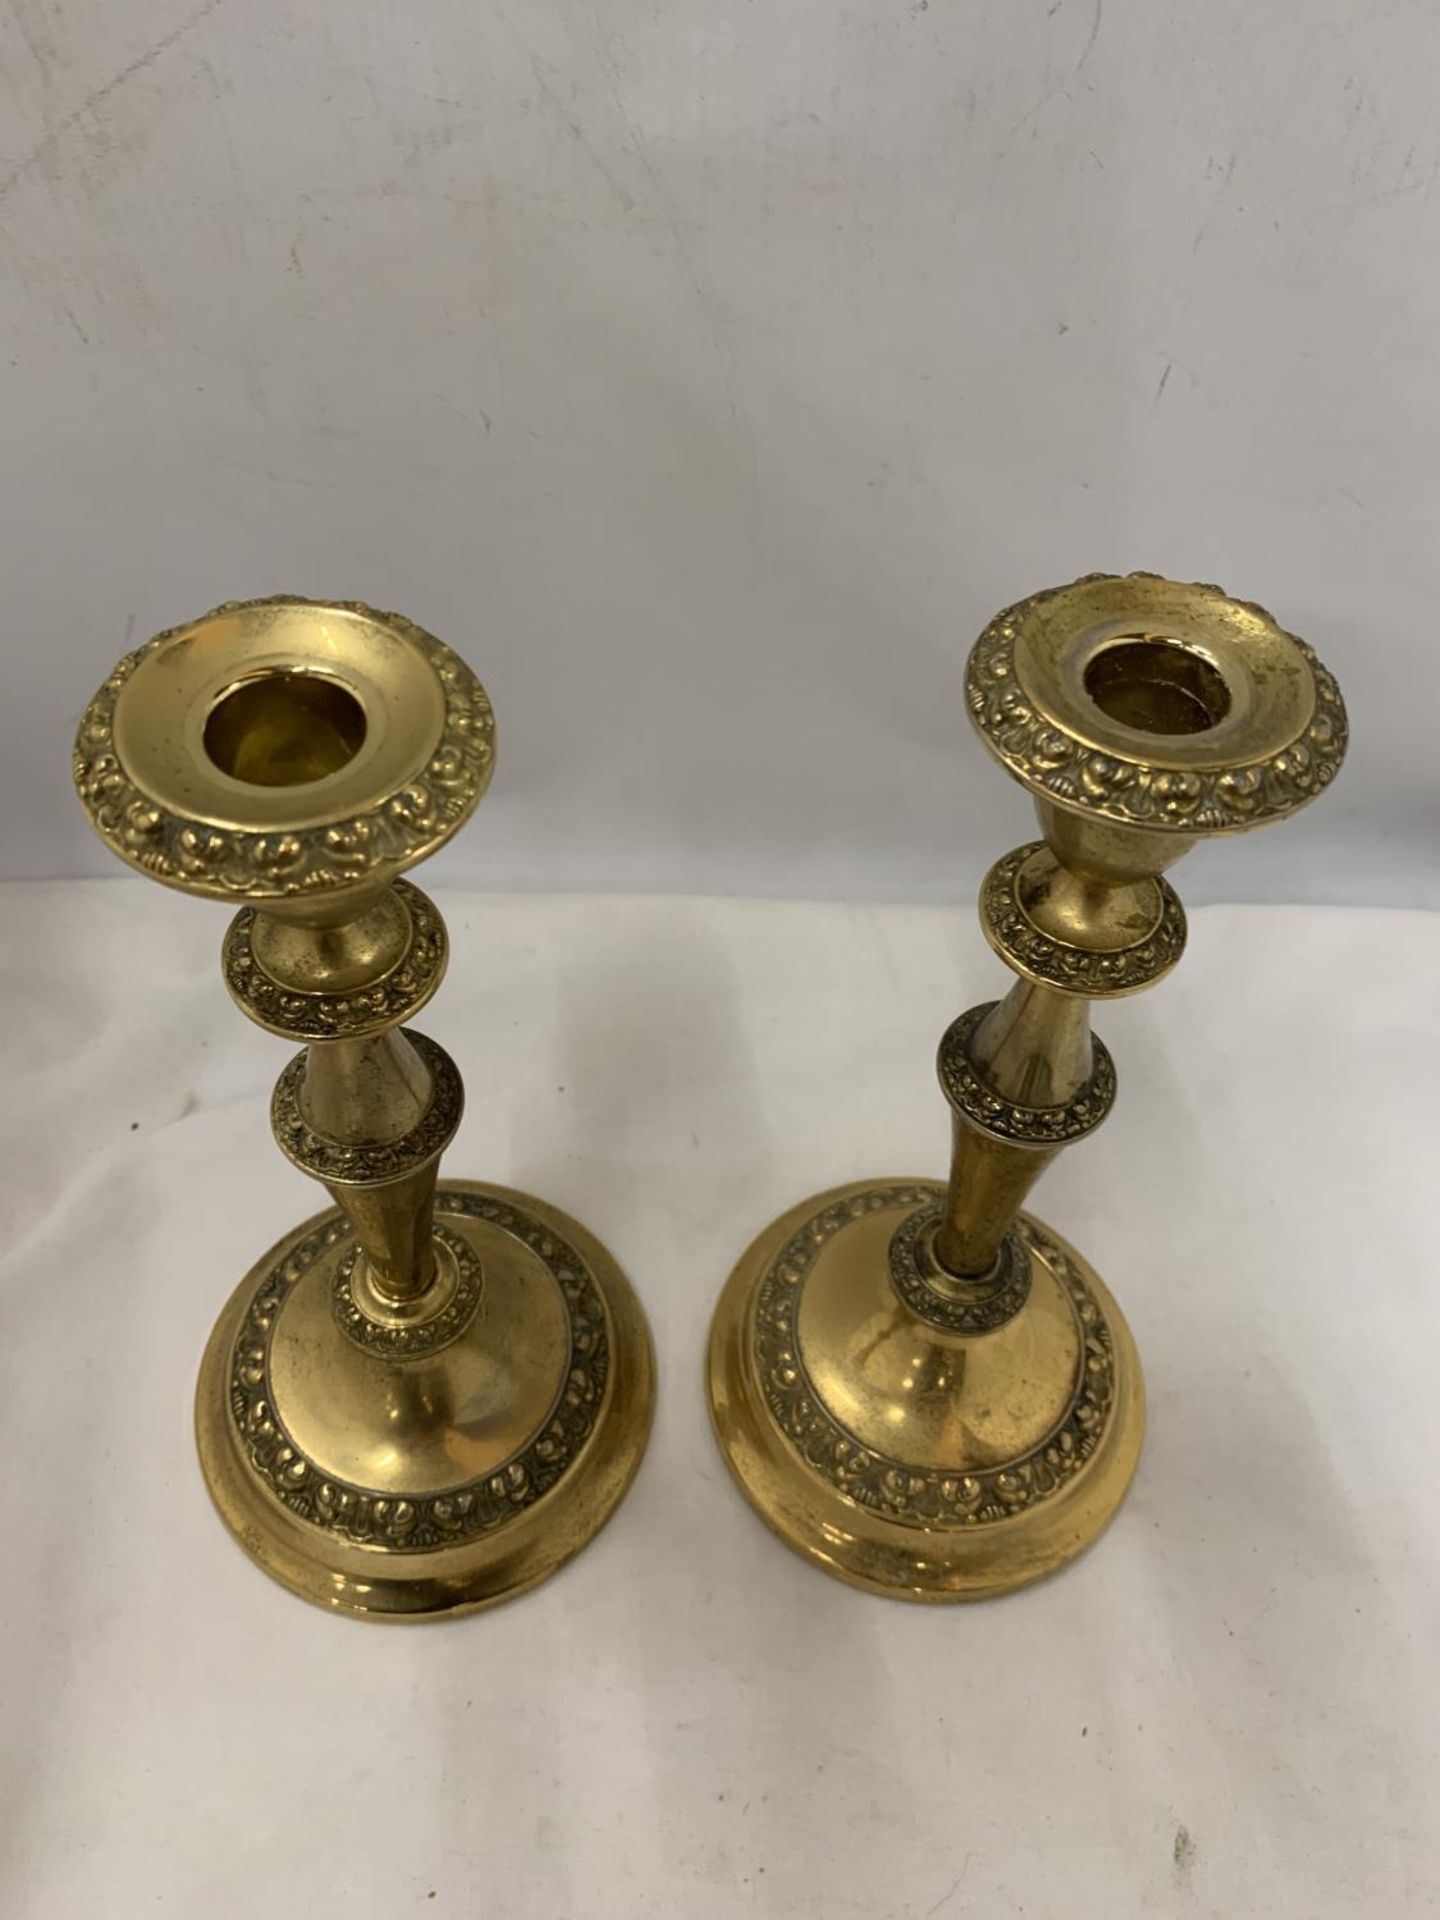 TWO LARGE BRASS CANDLESTICKS 27 CM